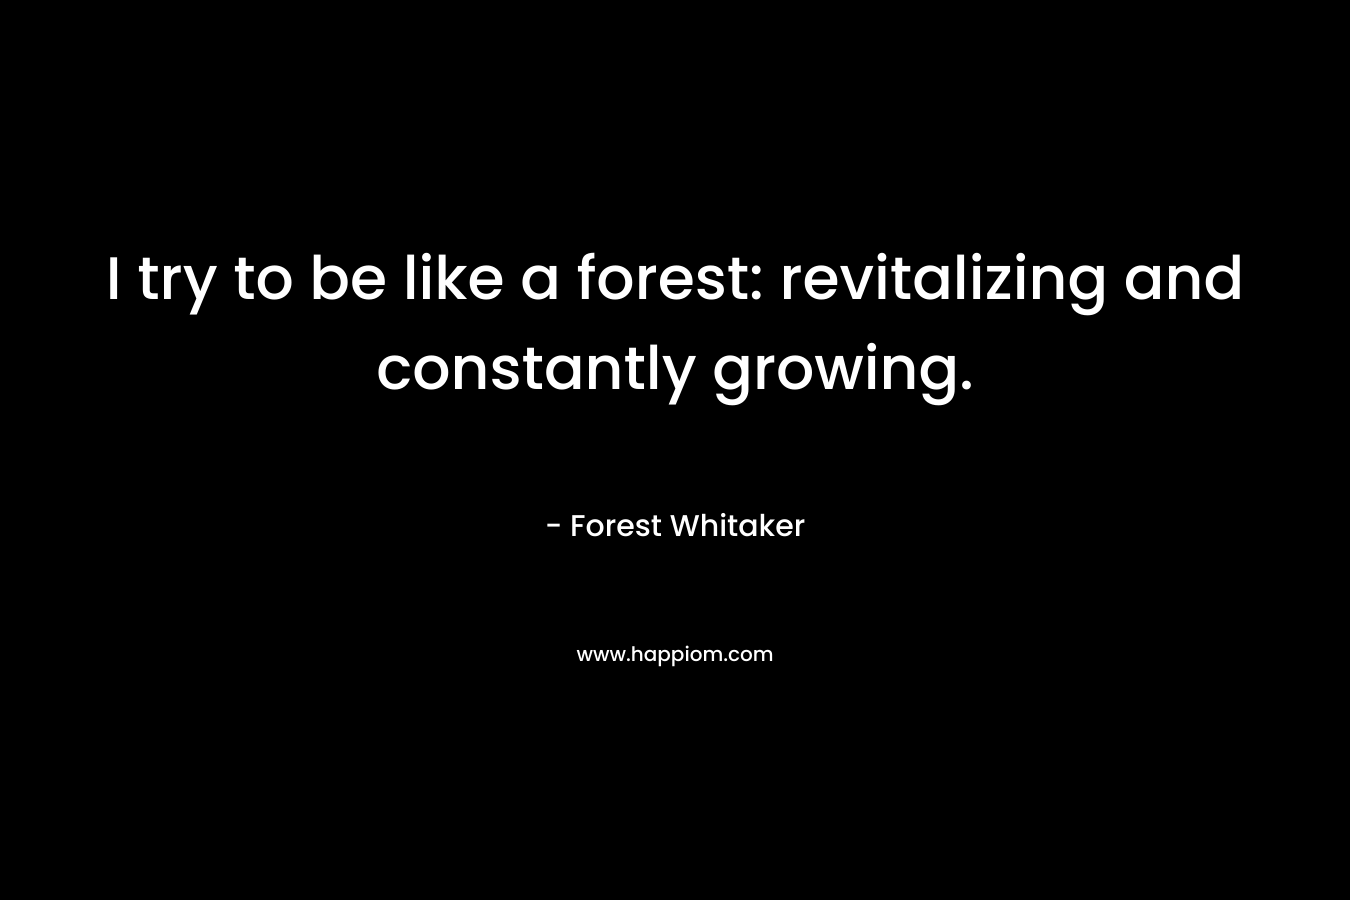 I try to be like a forest: revitalizing and constantly growing.